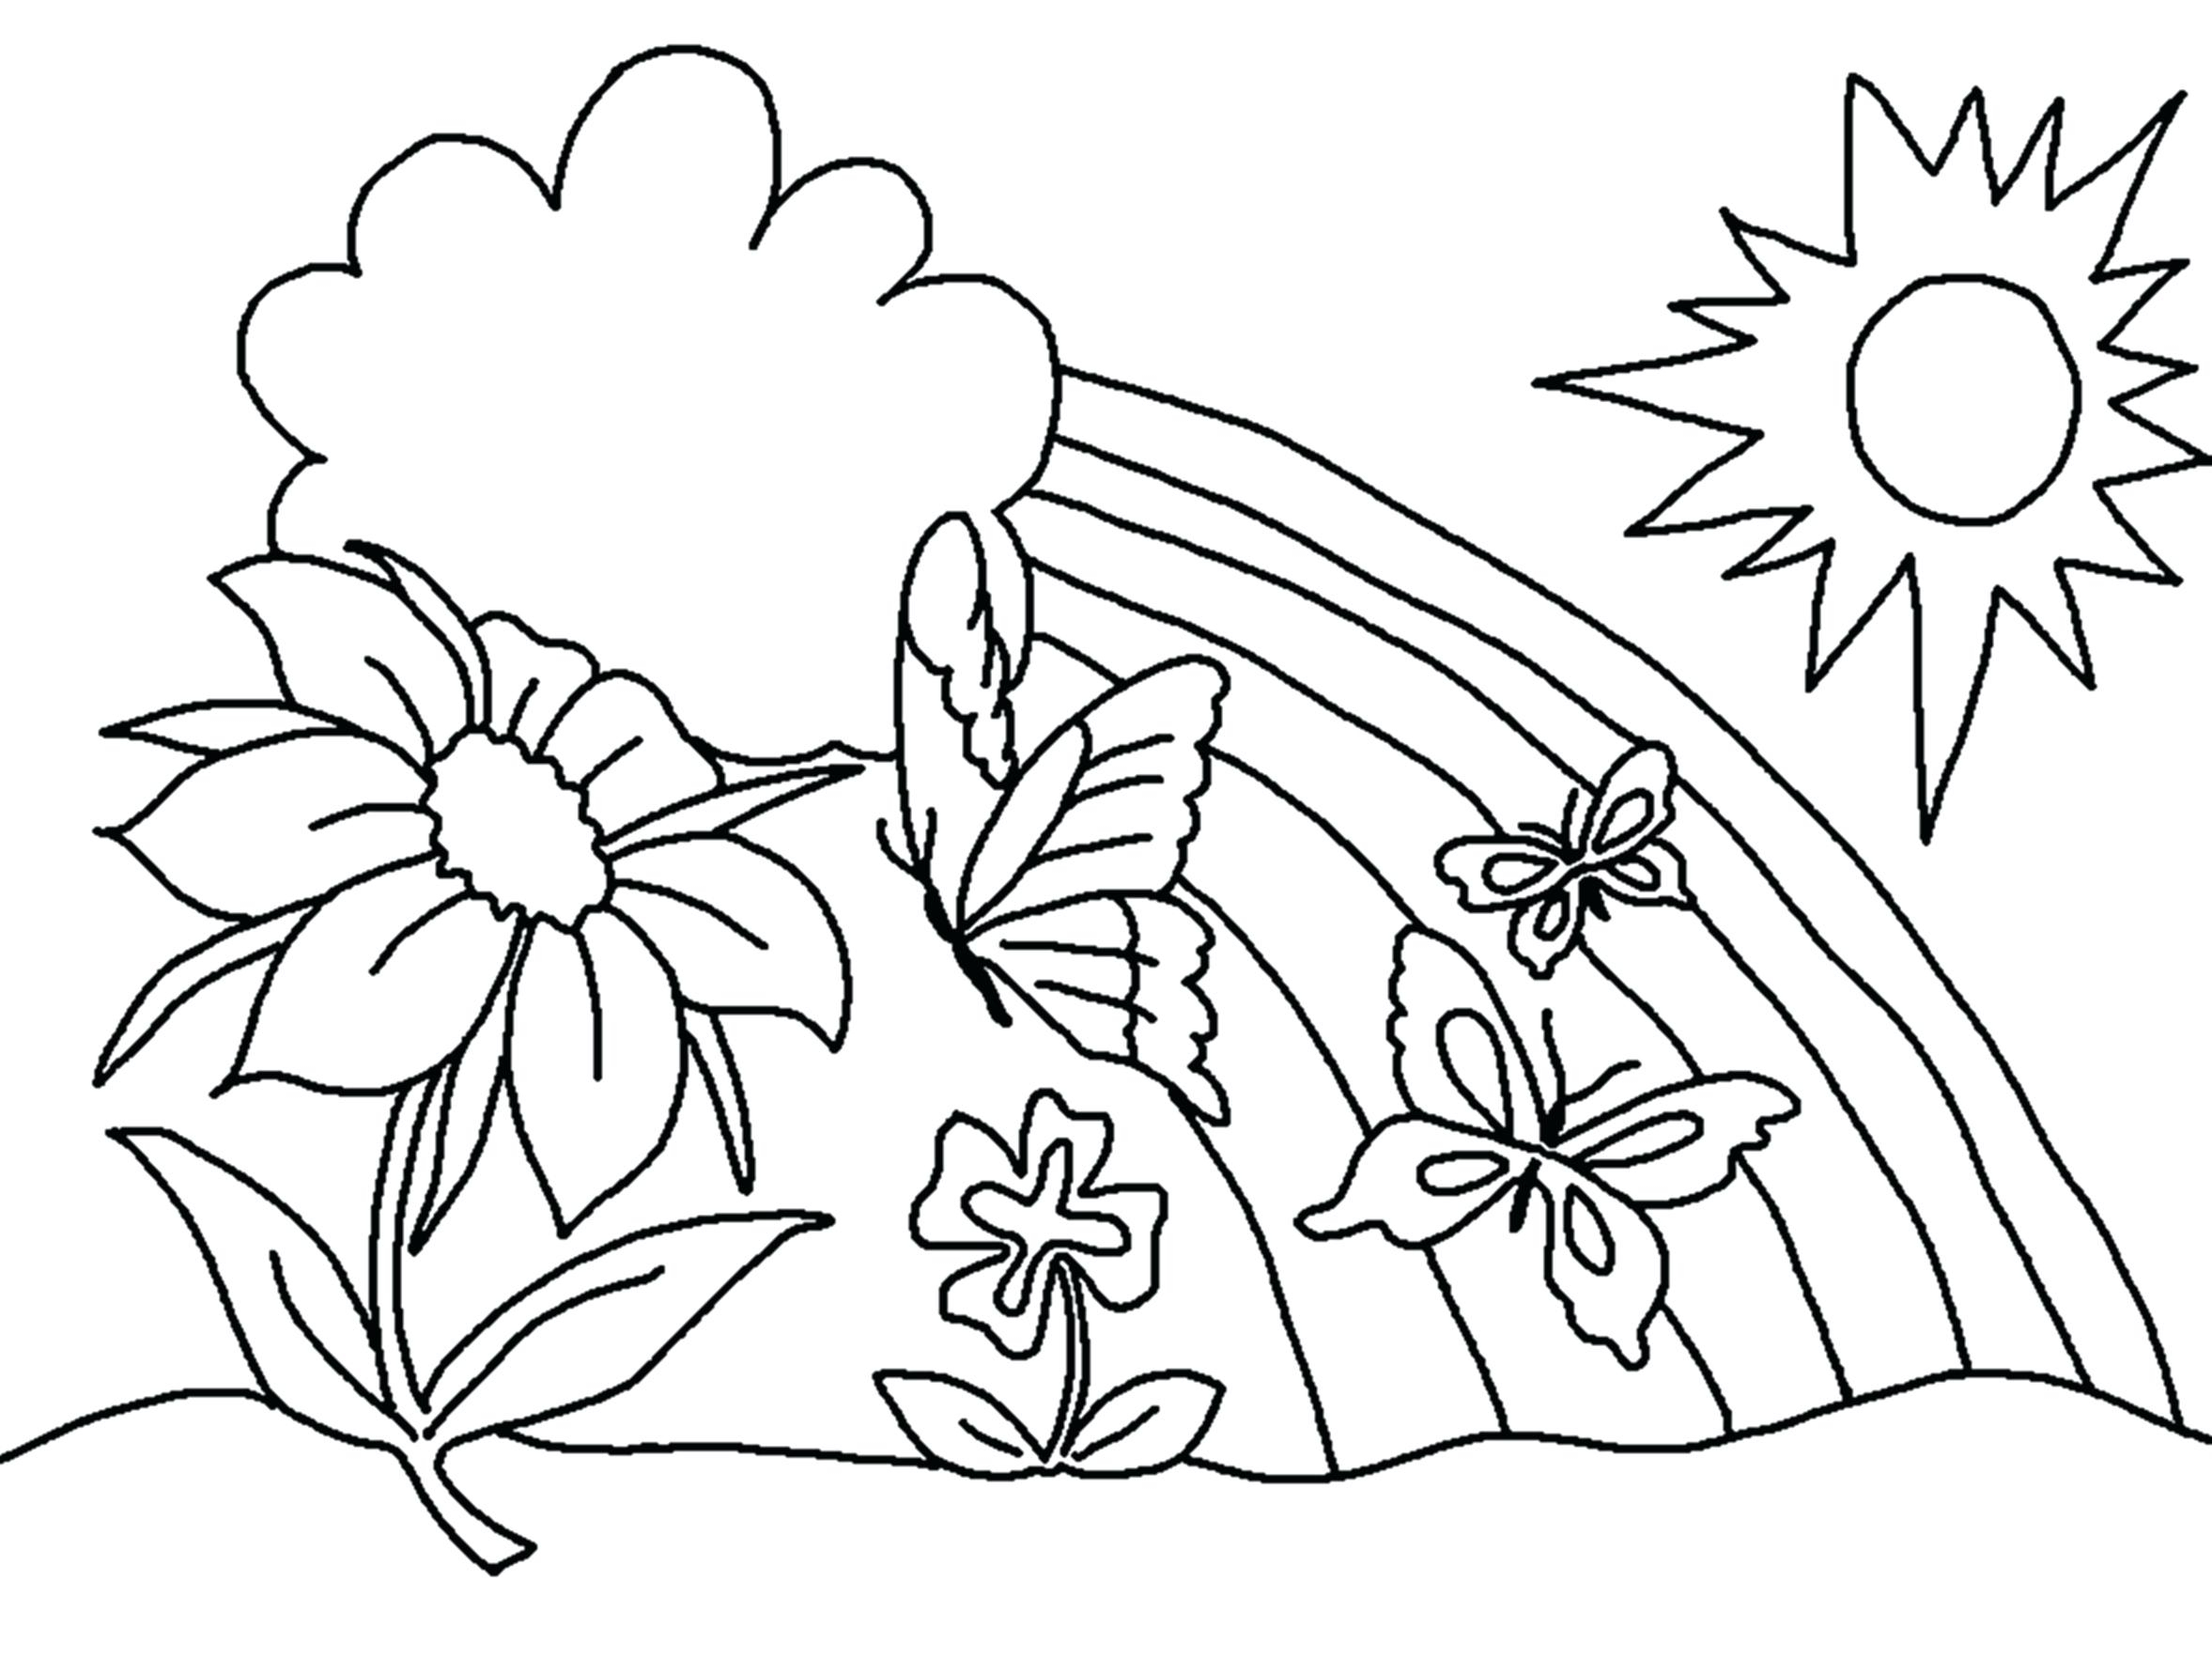 Coloring Pages : Coloring Pages Toddlers Printablesree - Free Printable Coloring Pages For Toddlers